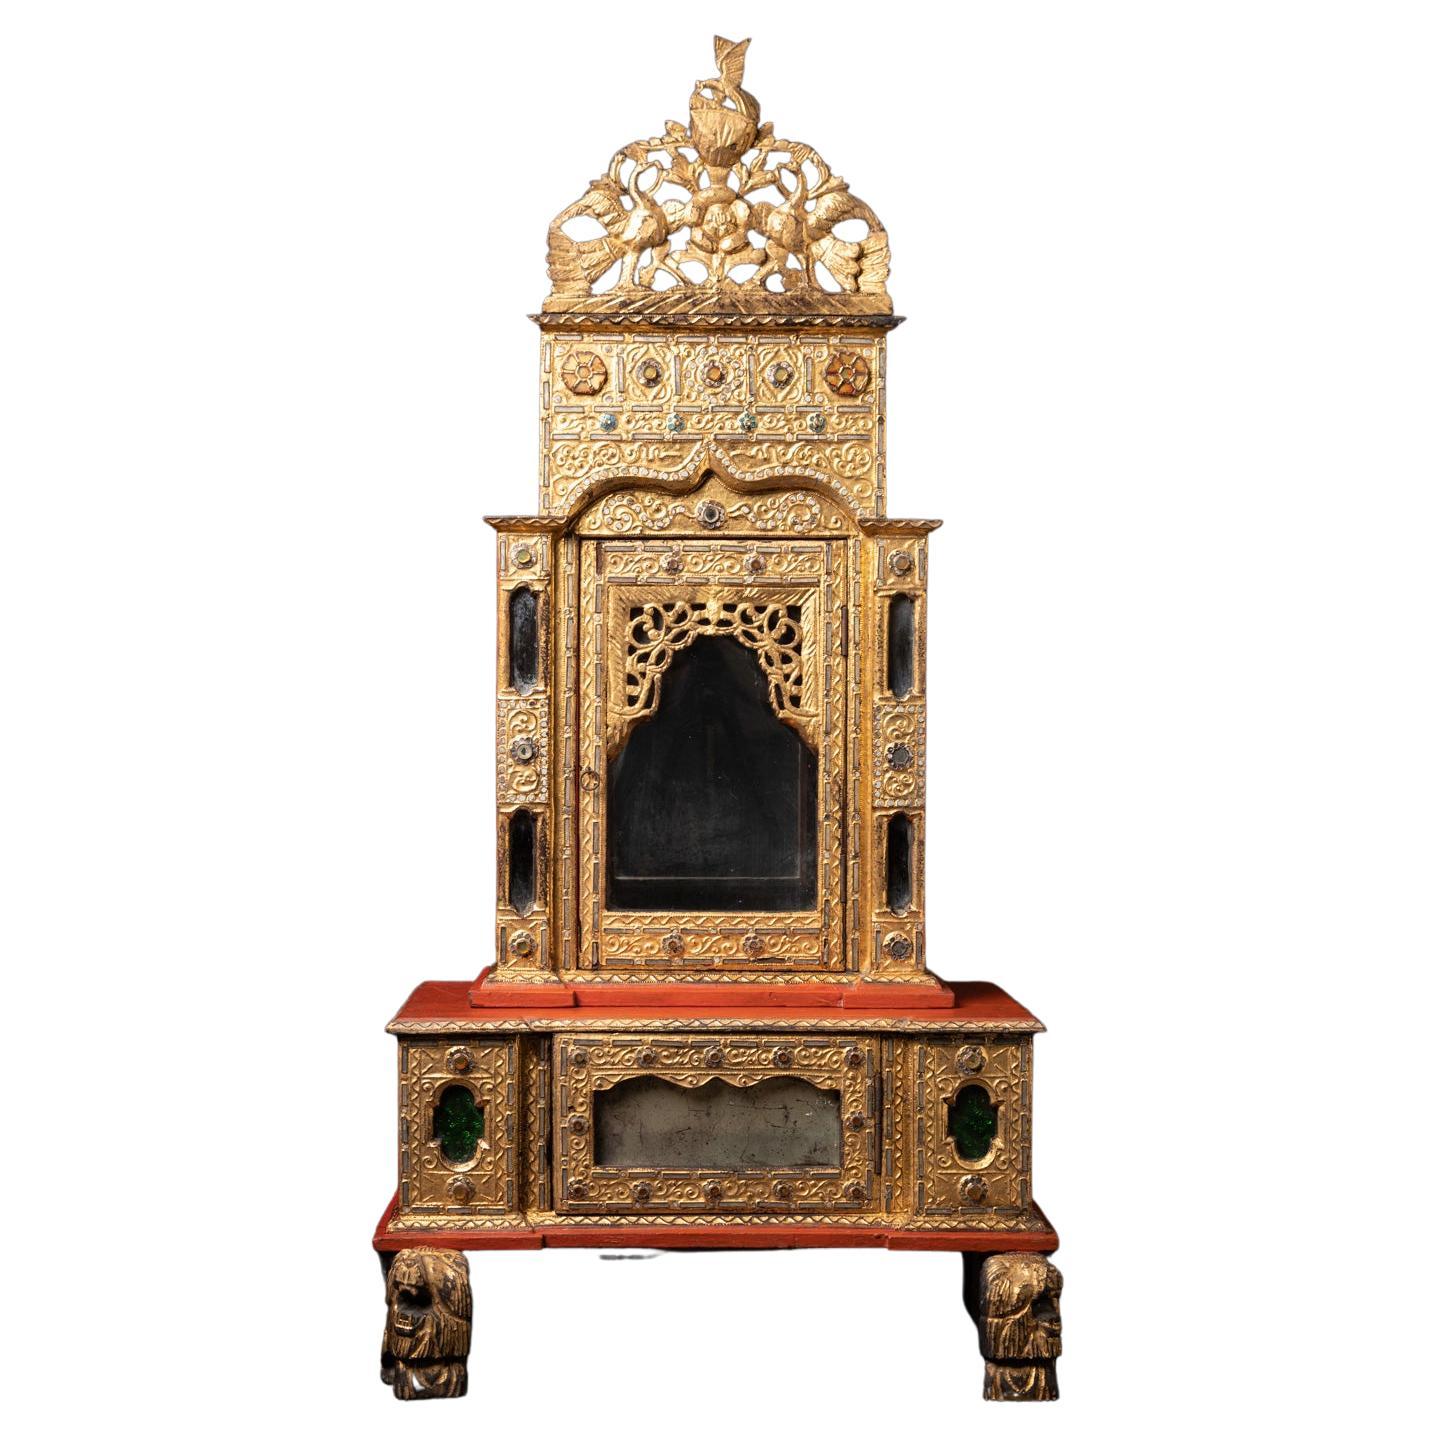 19th century antique wooden Burmese Buddha temple in Mandalay style For Sale